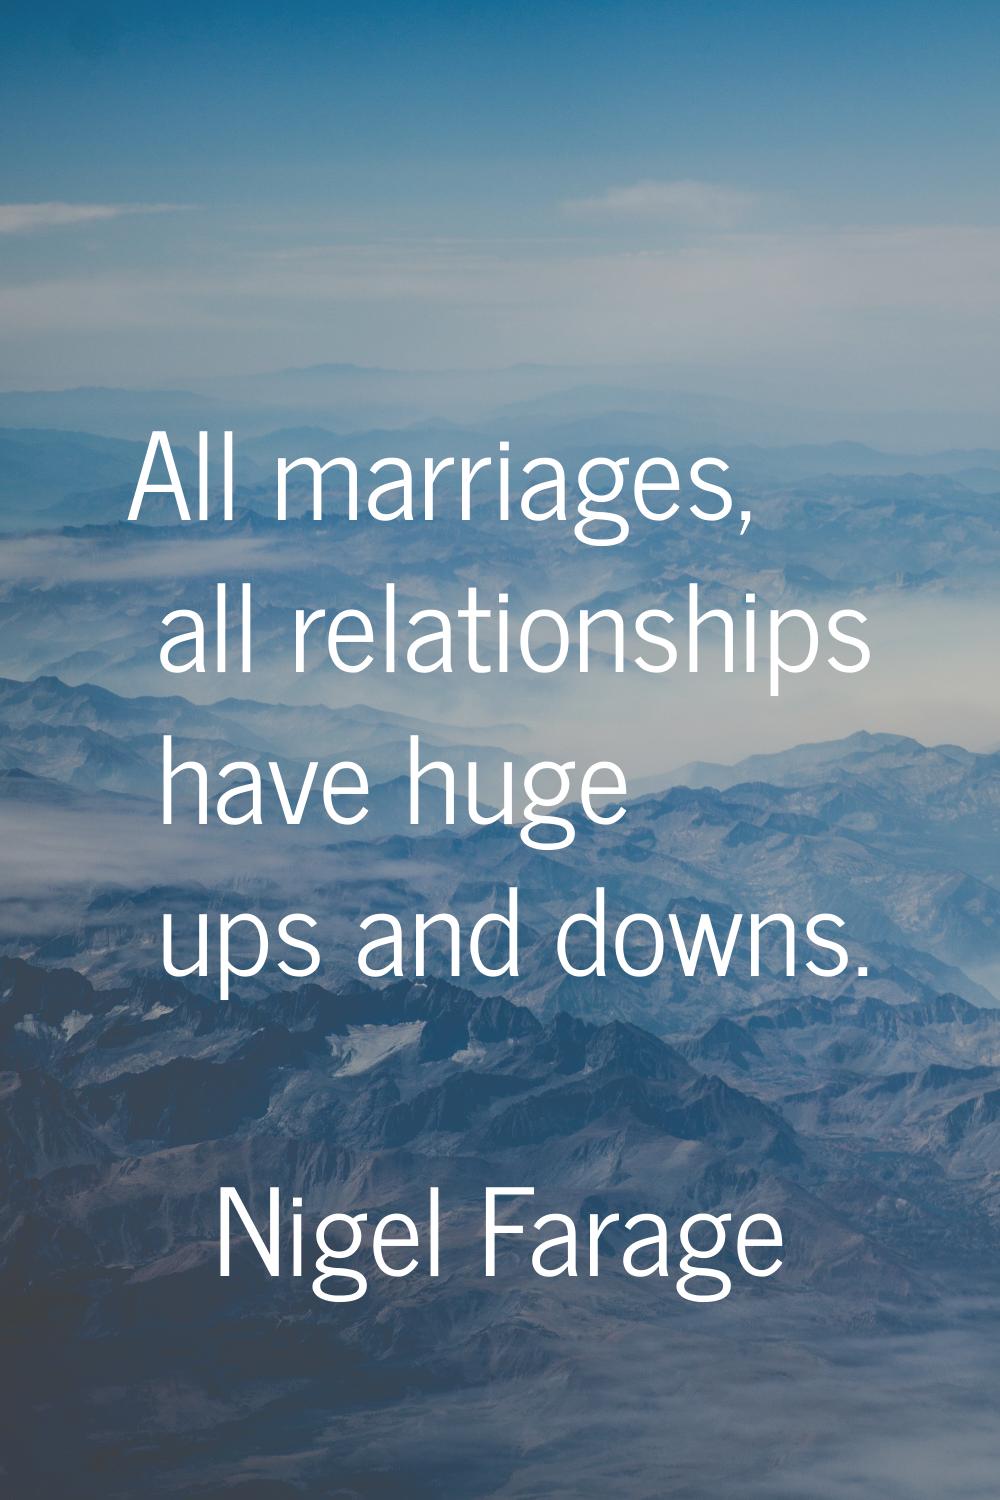 All marriages, all relationships have huge ups and downs.